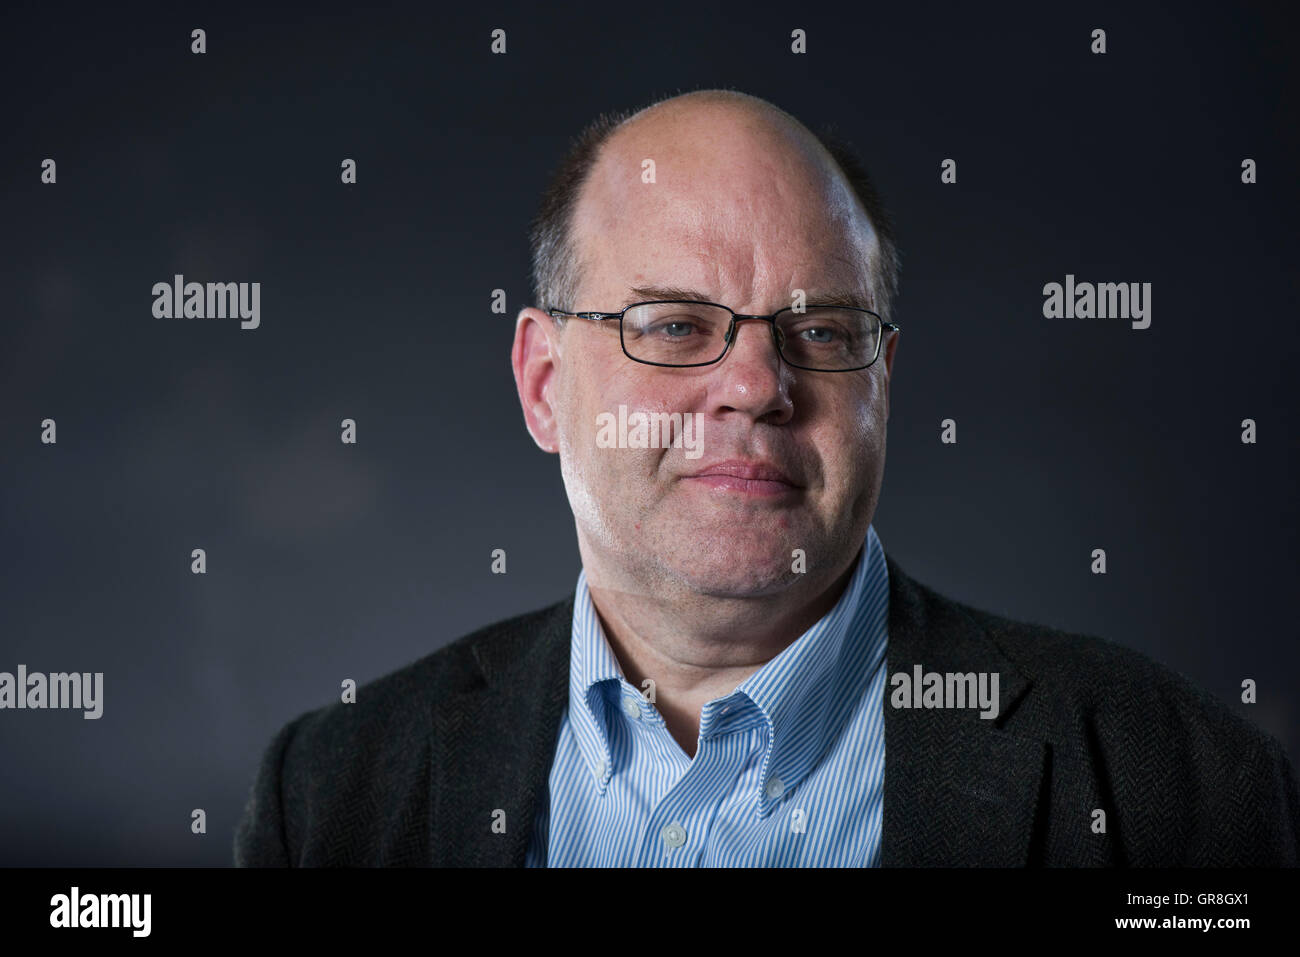 English journalist, broadcaster and author Mark Lawson. Stock Photo